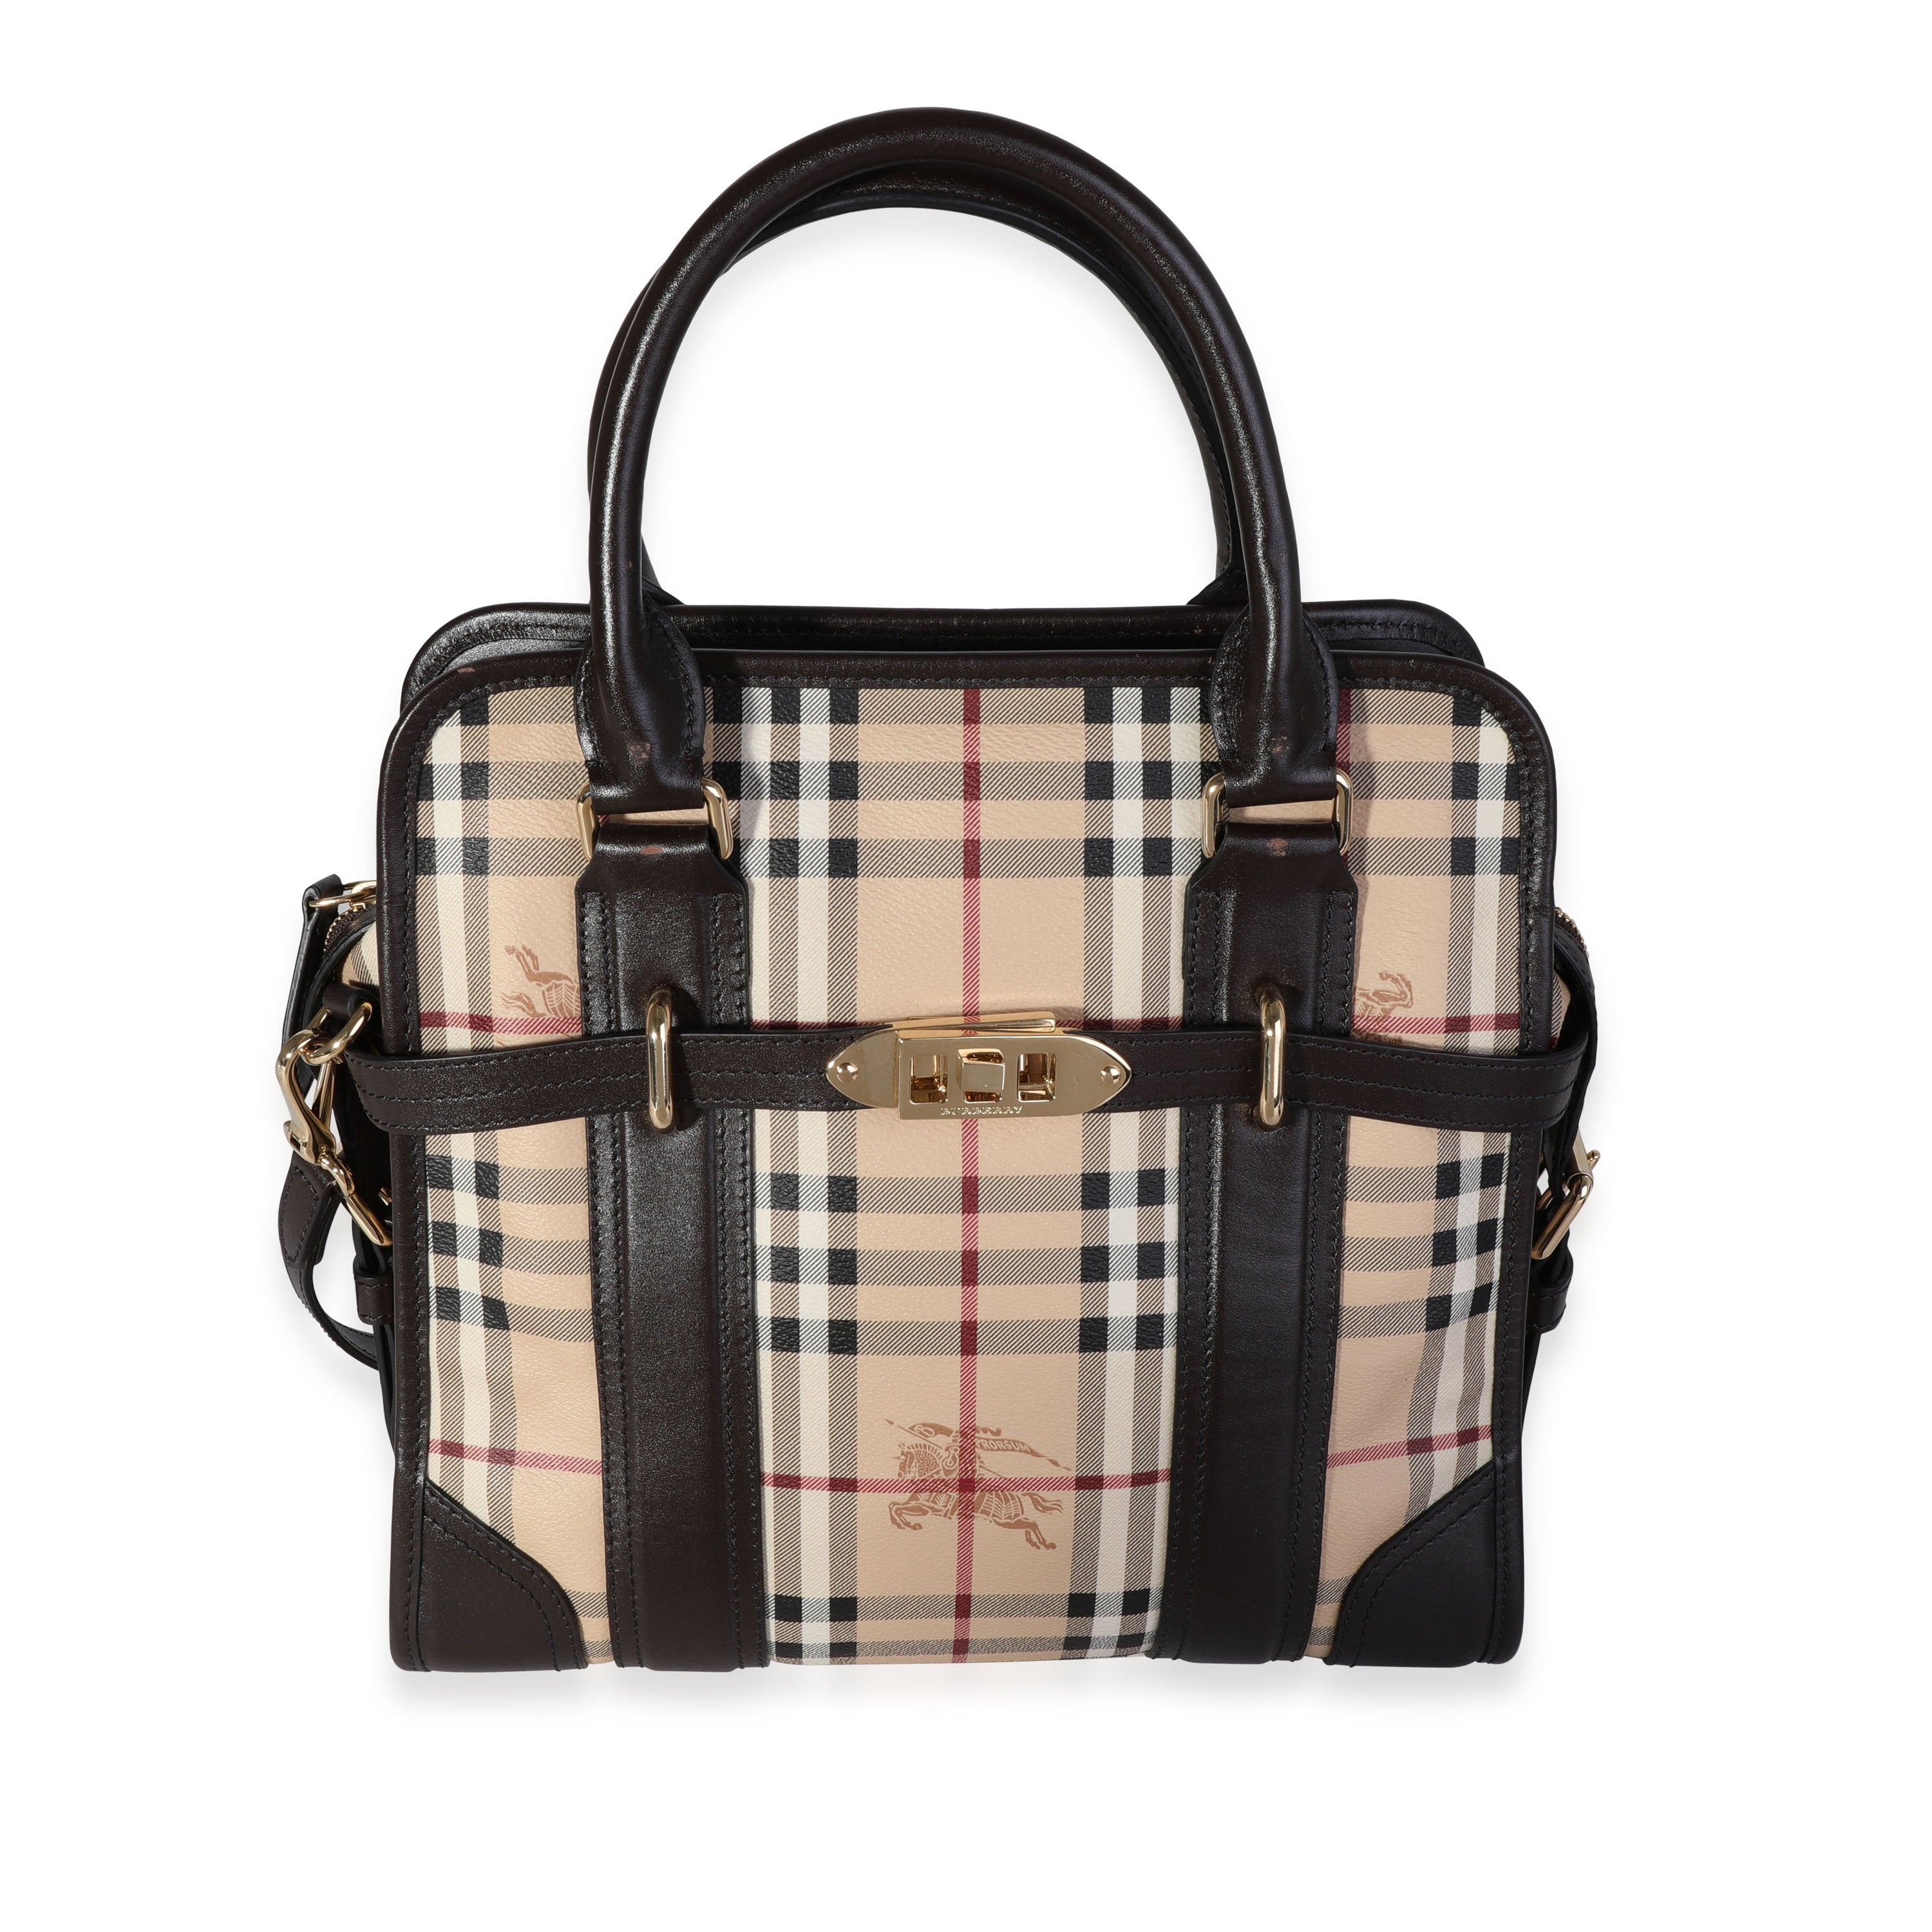 Burberry The Bridle Bag In Leather And Haymarket Check